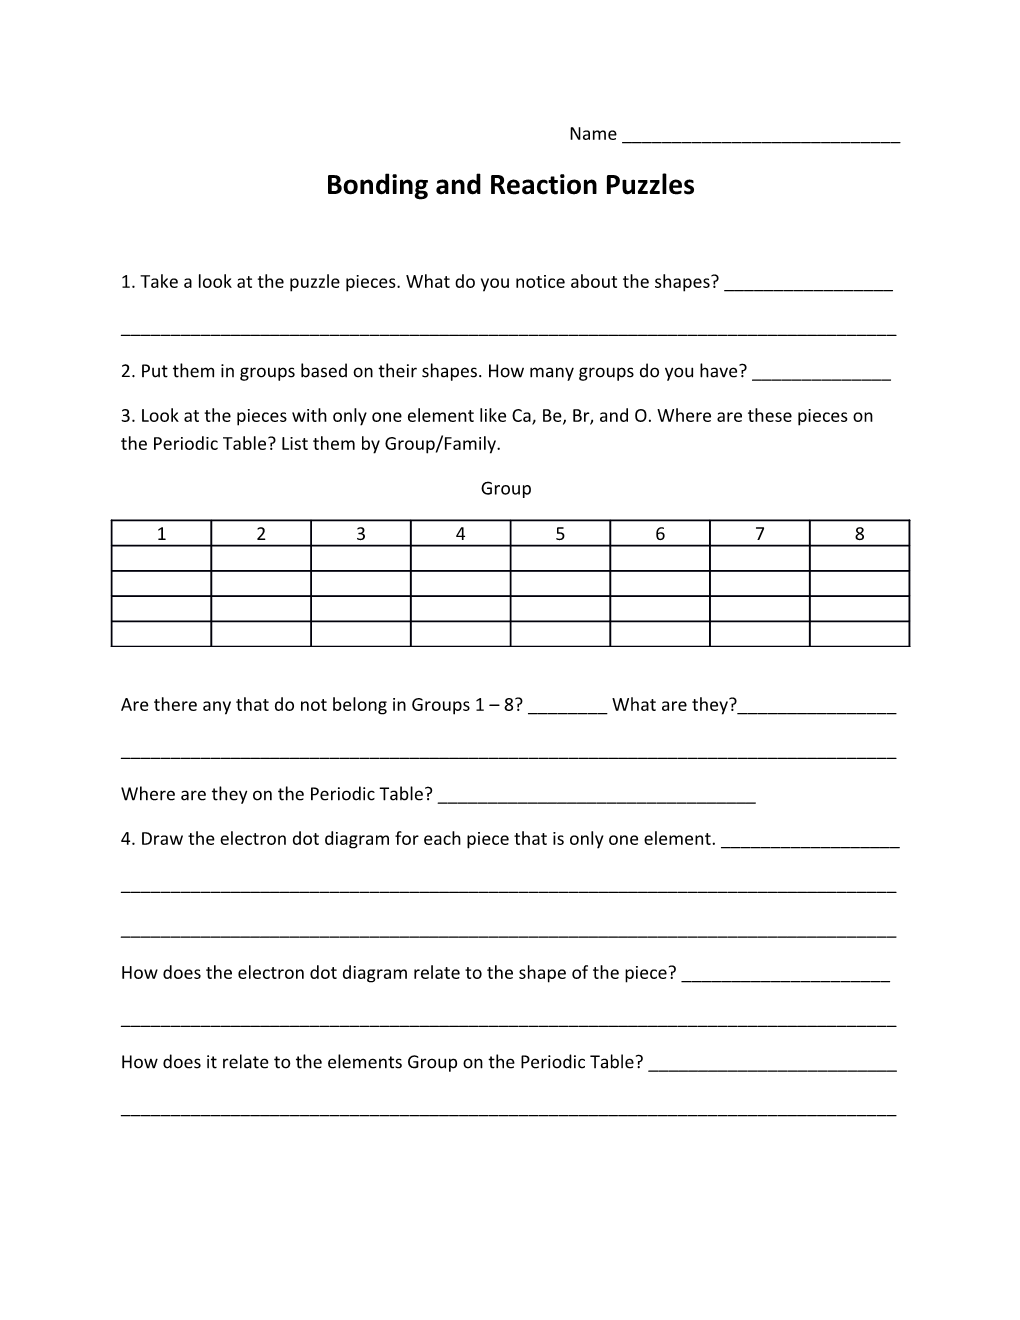 Bonding and Reaction Puzzles